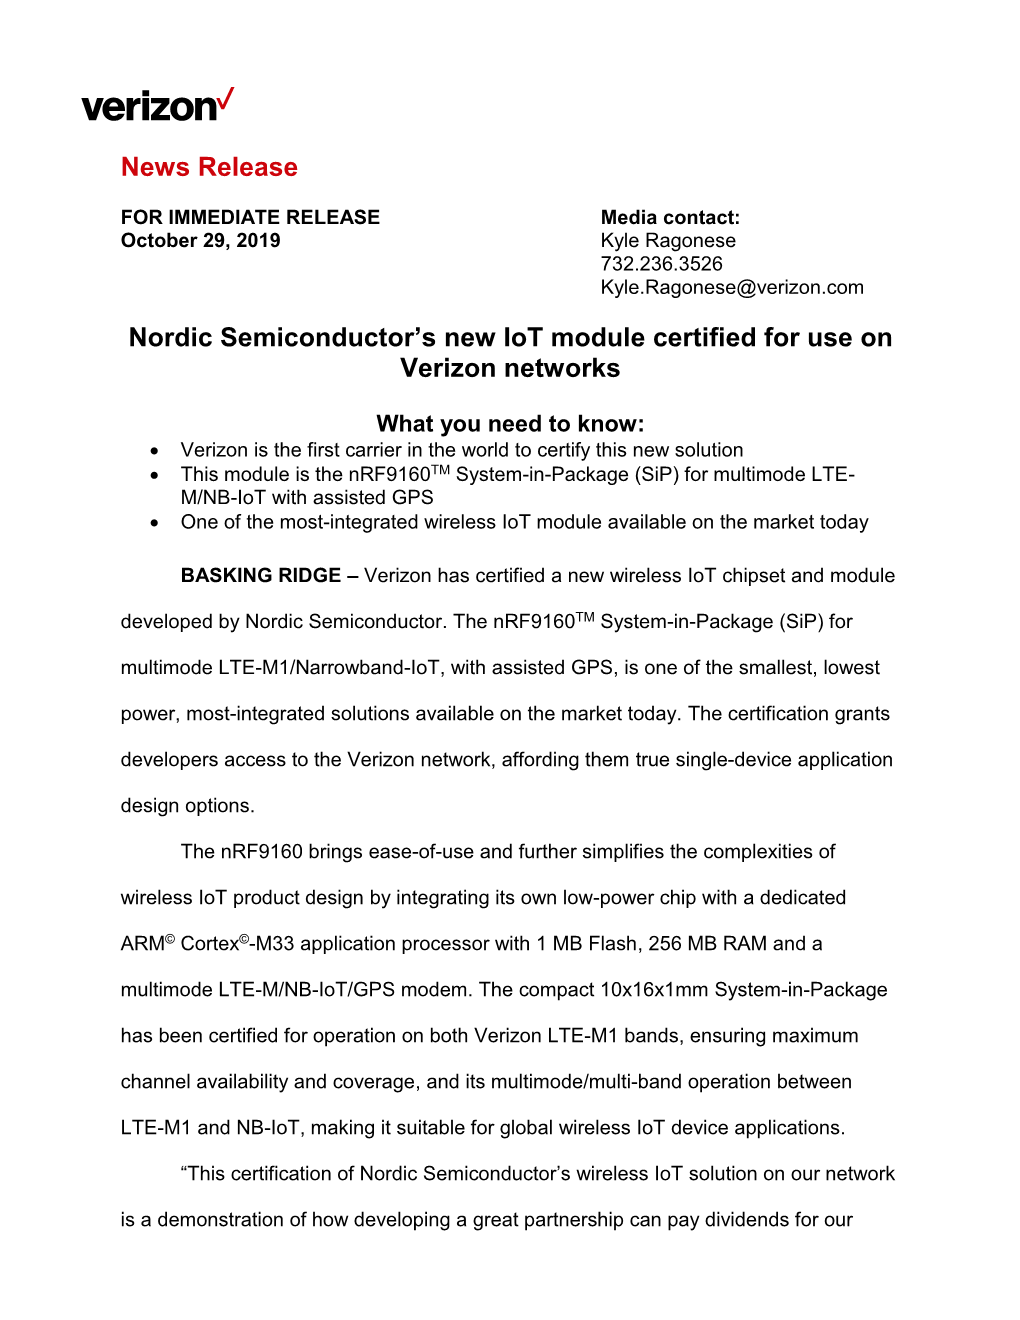 Nordic Semiconductor's New Iot Module Certified for Use on Verizon